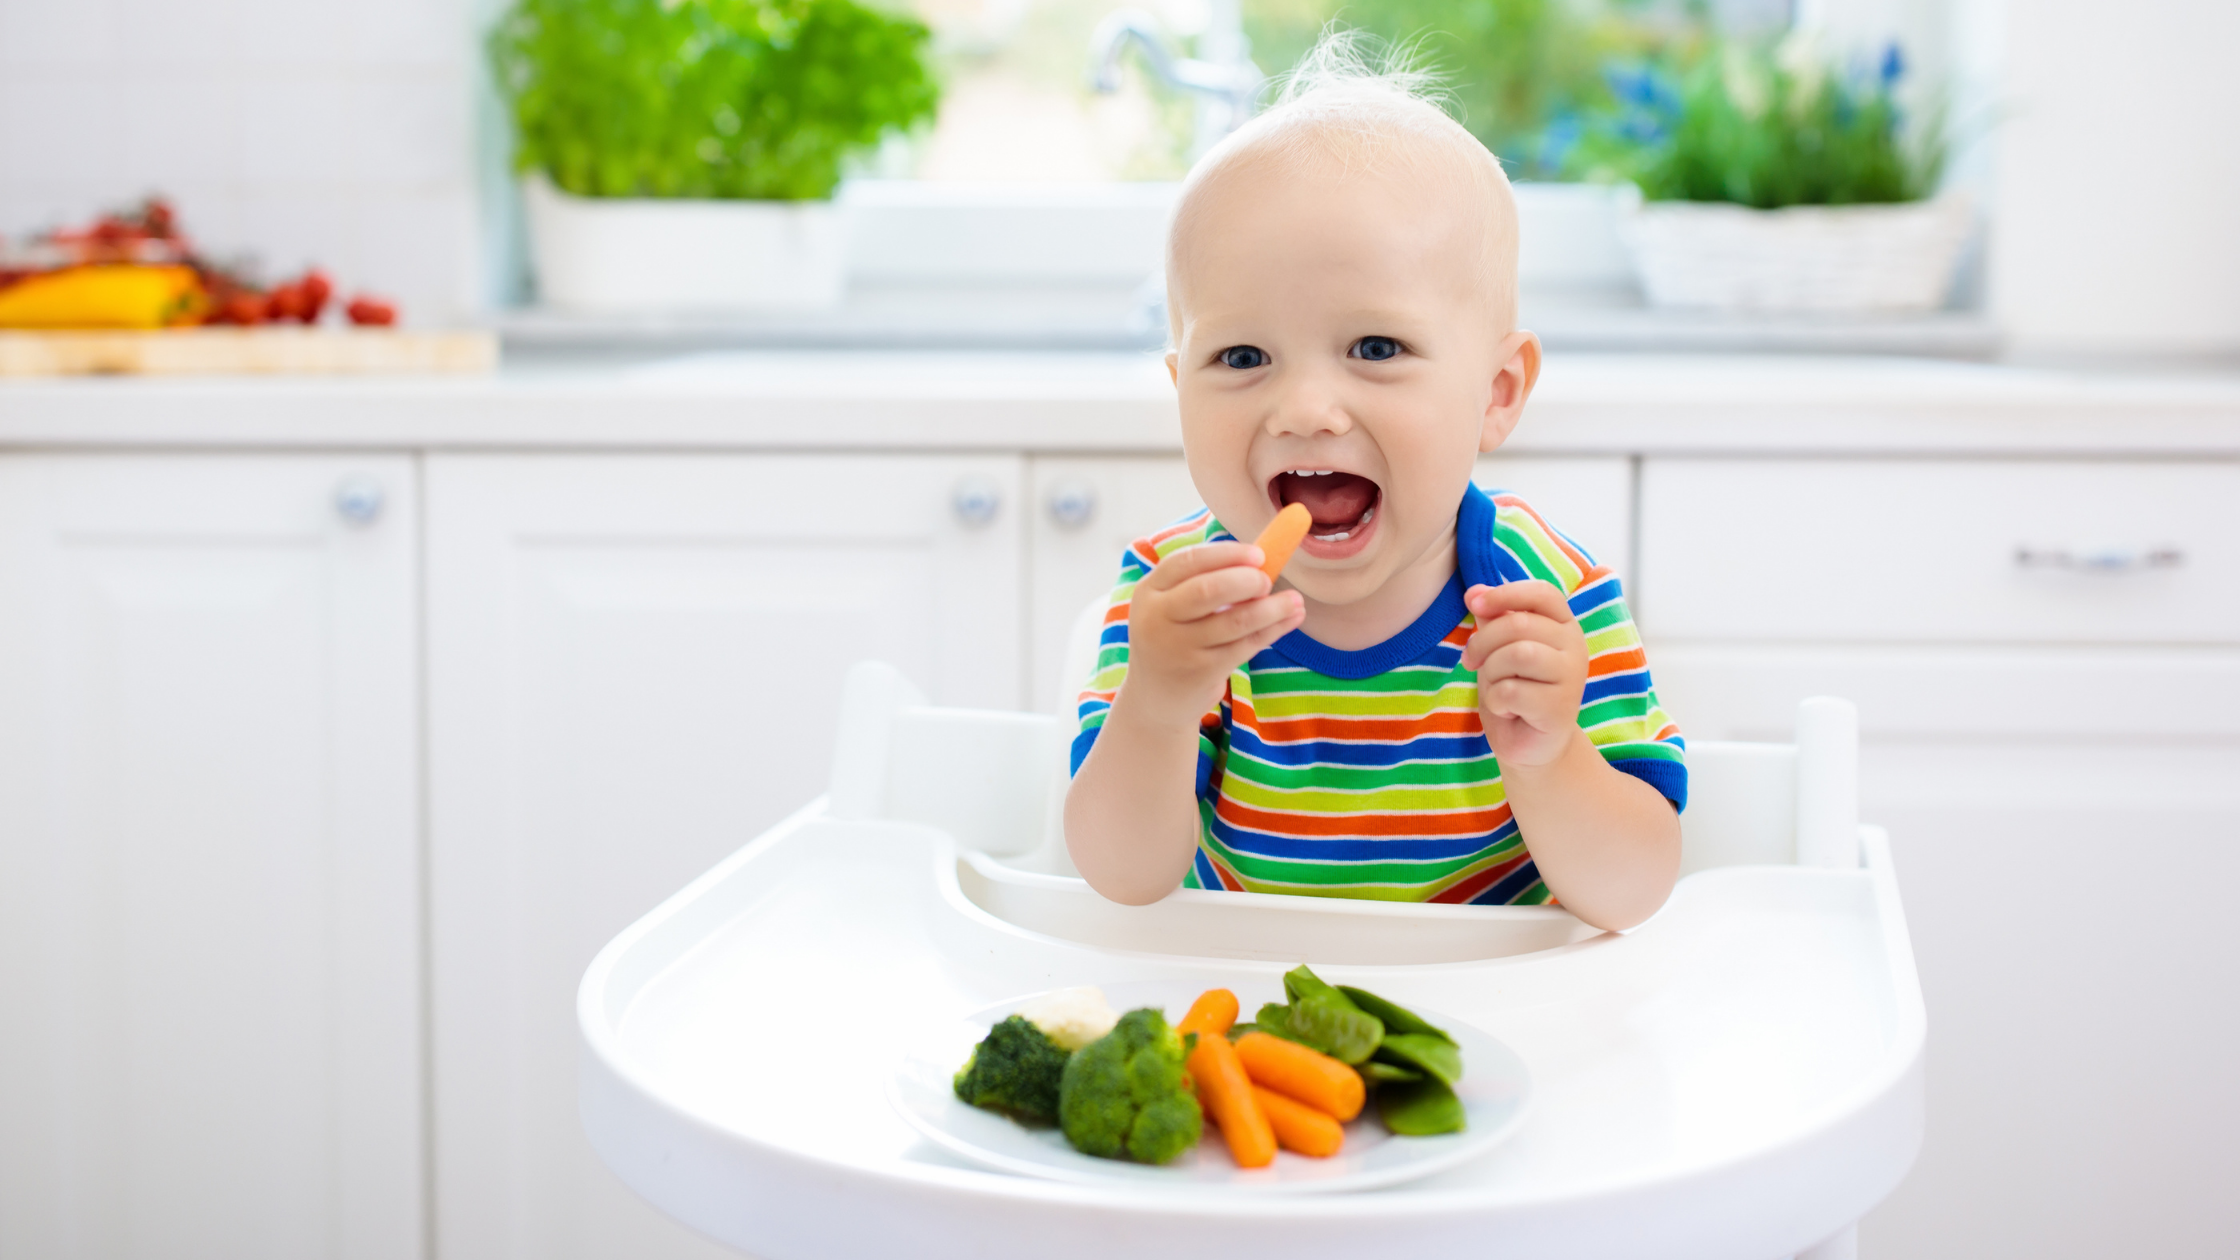 Can Diet Affect Potty Training?